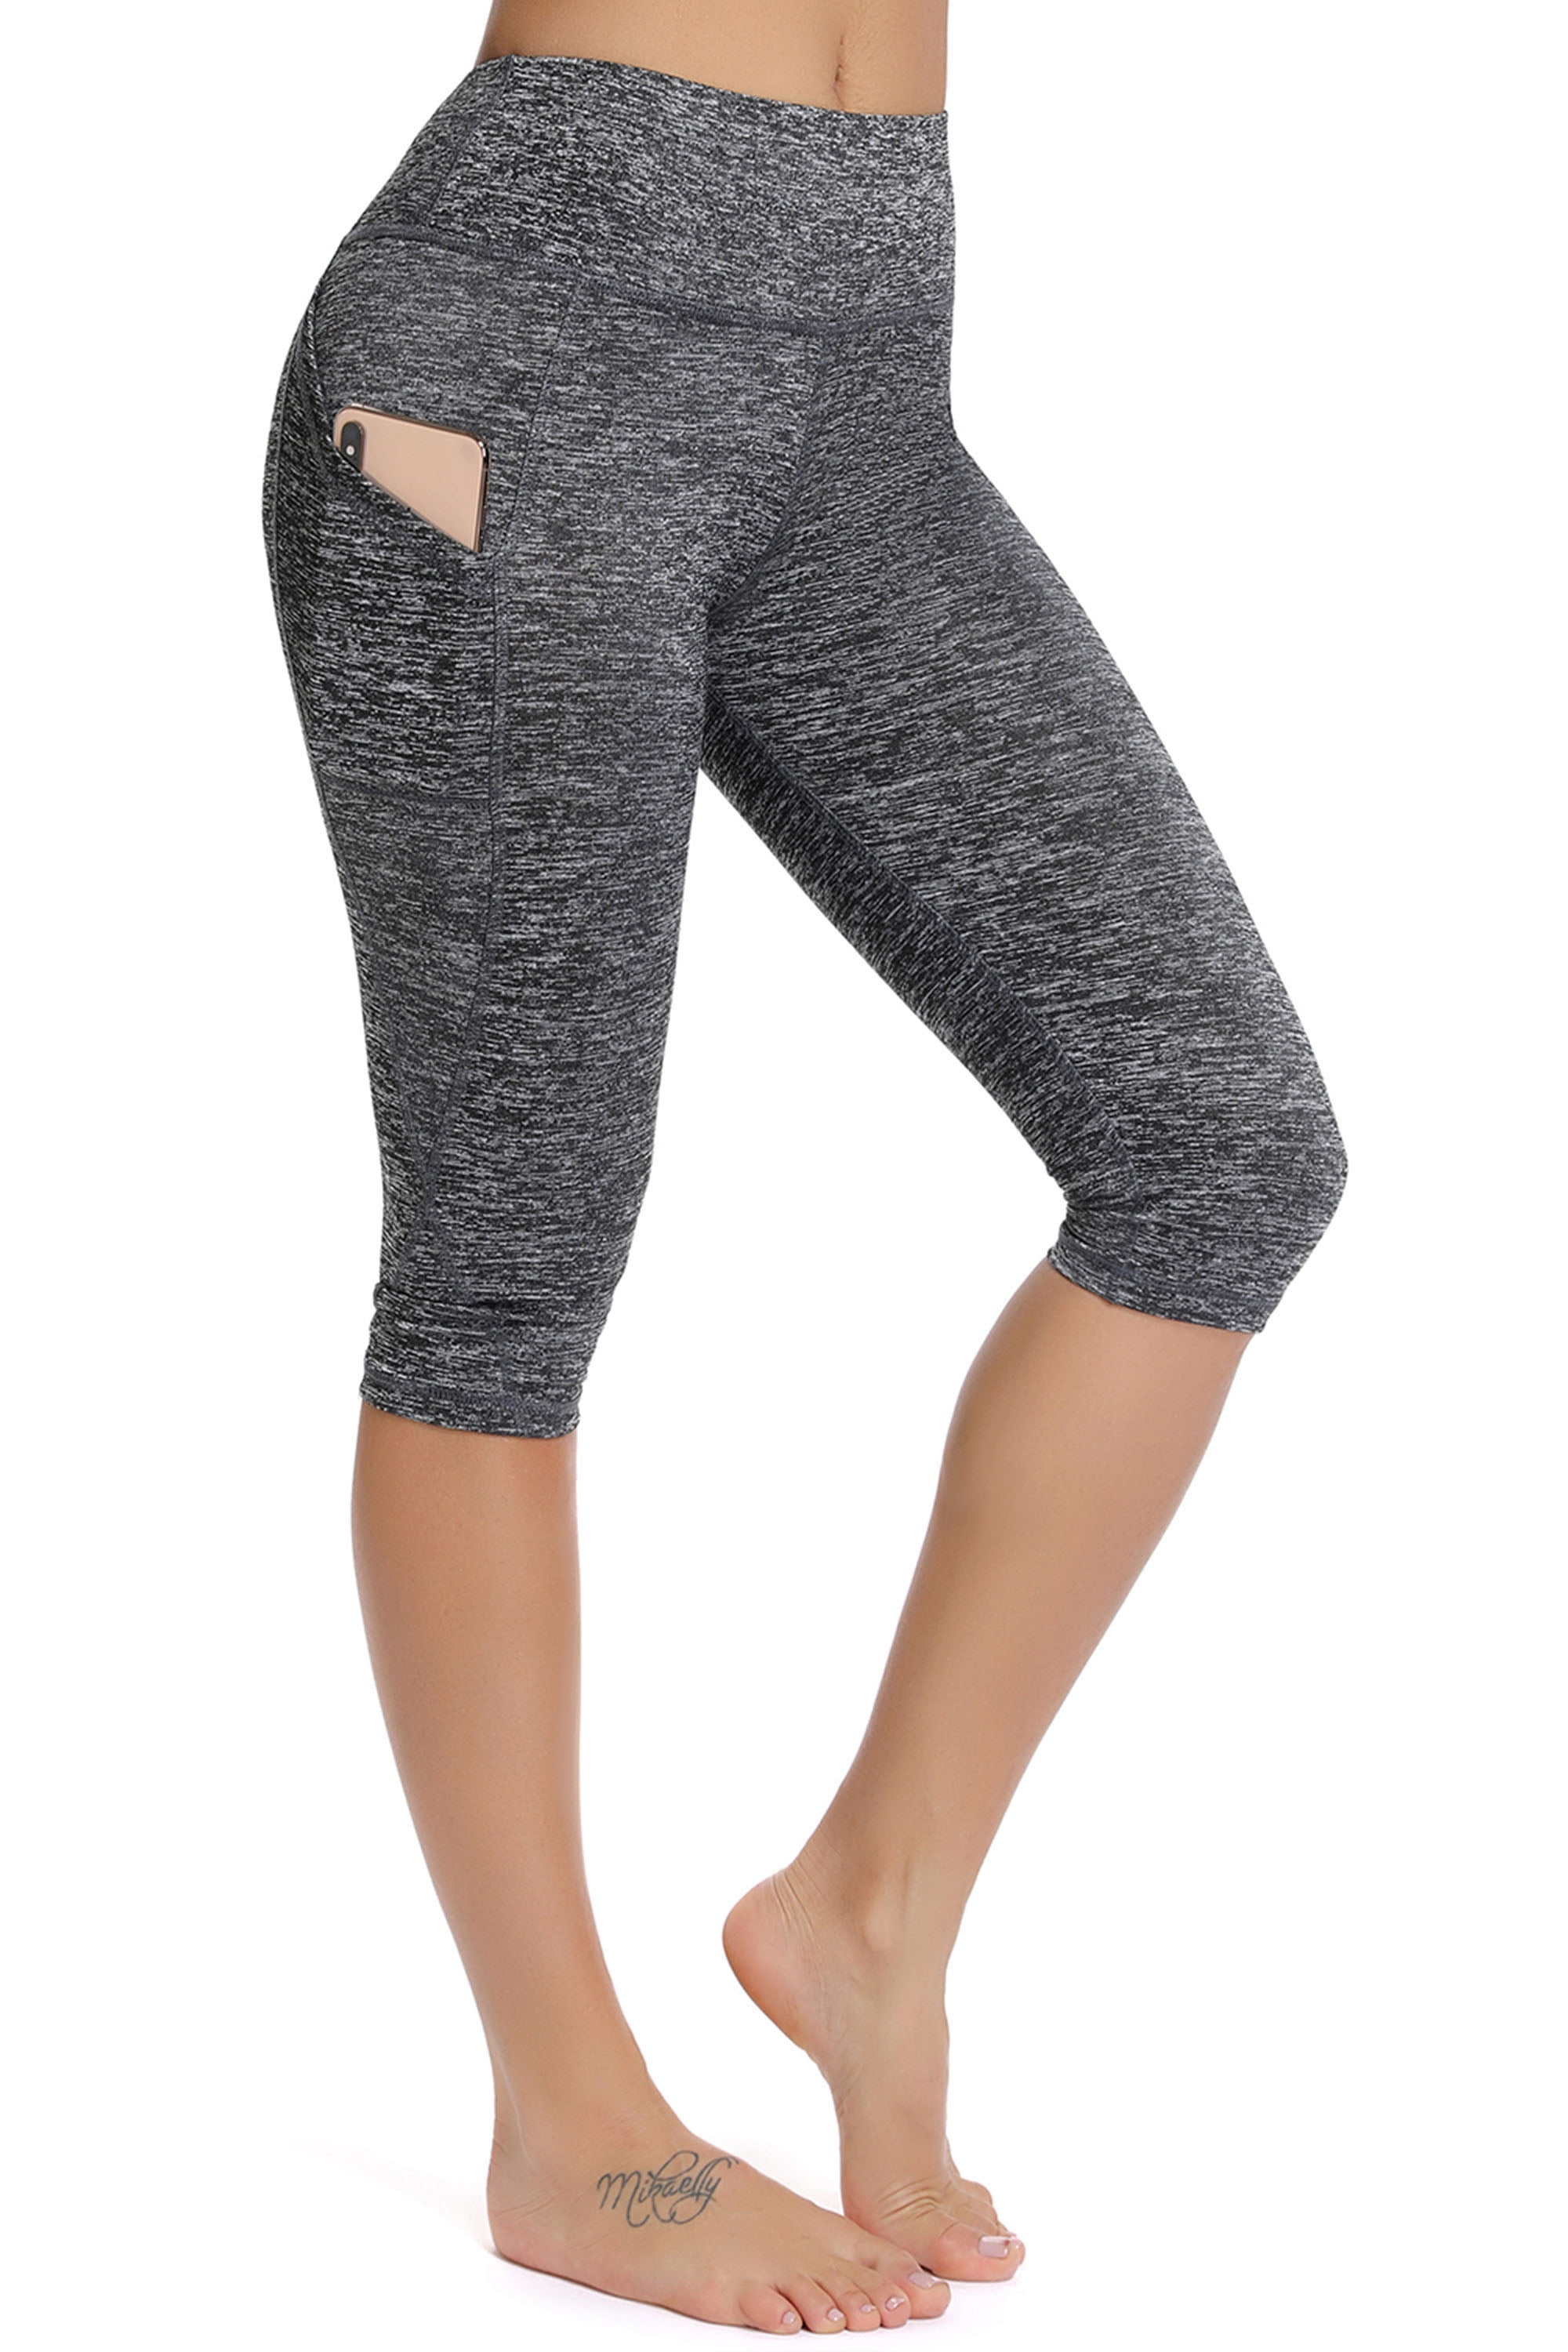 Yoga Pants for Women with Pockets High Waisted Leggings with Pockets for Women Workout Leggings for Women